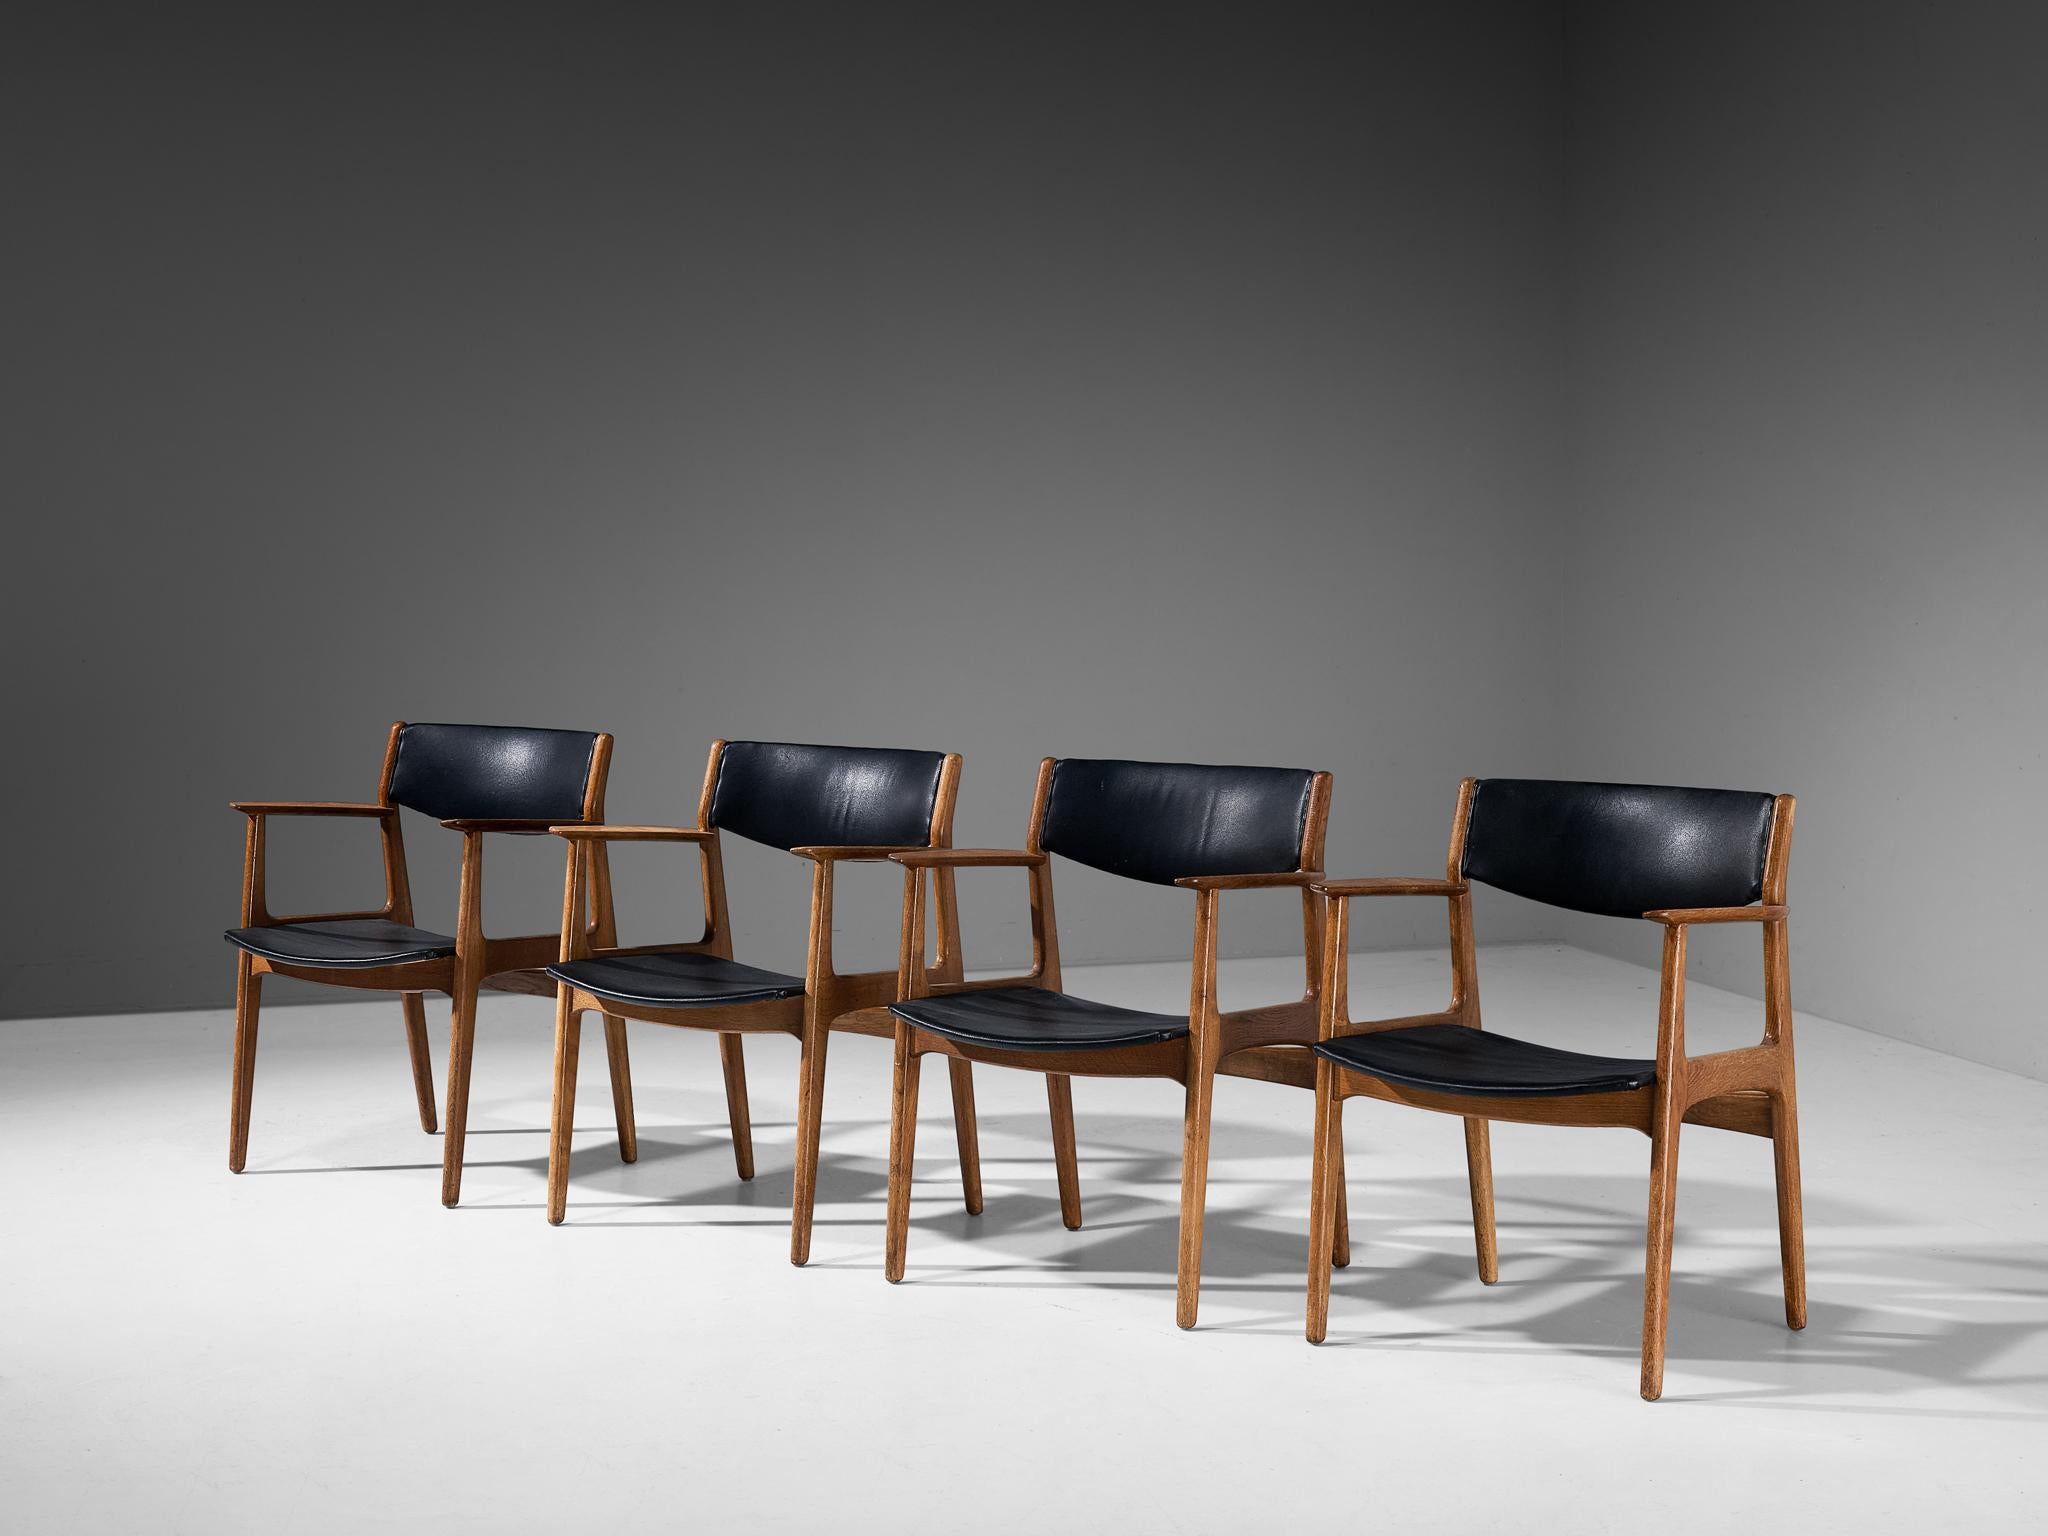 Set of four dining chairs, leatherette, oak, Denmark, 1960s 

This classic set is being a wonderful example of Scandinavian design from the Midcentury period. The seat and backrest are characterized by subtle curved lines and round shapes that